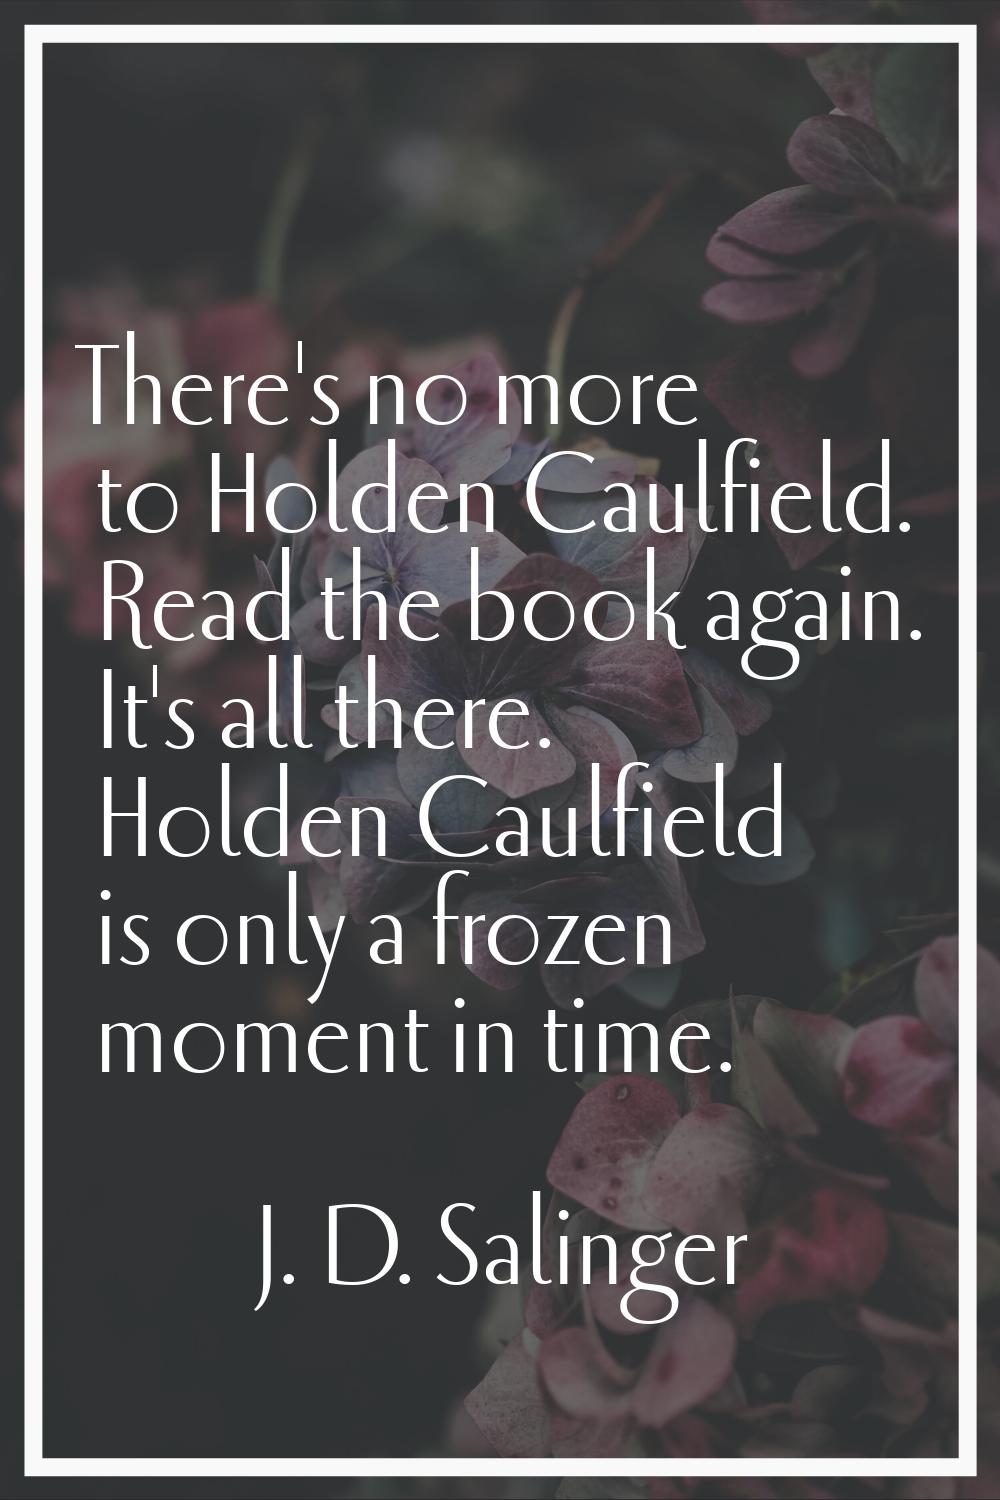 There's no more to Holden Caulfield. Read the book again. It's all there. Holden Caulfield is only 